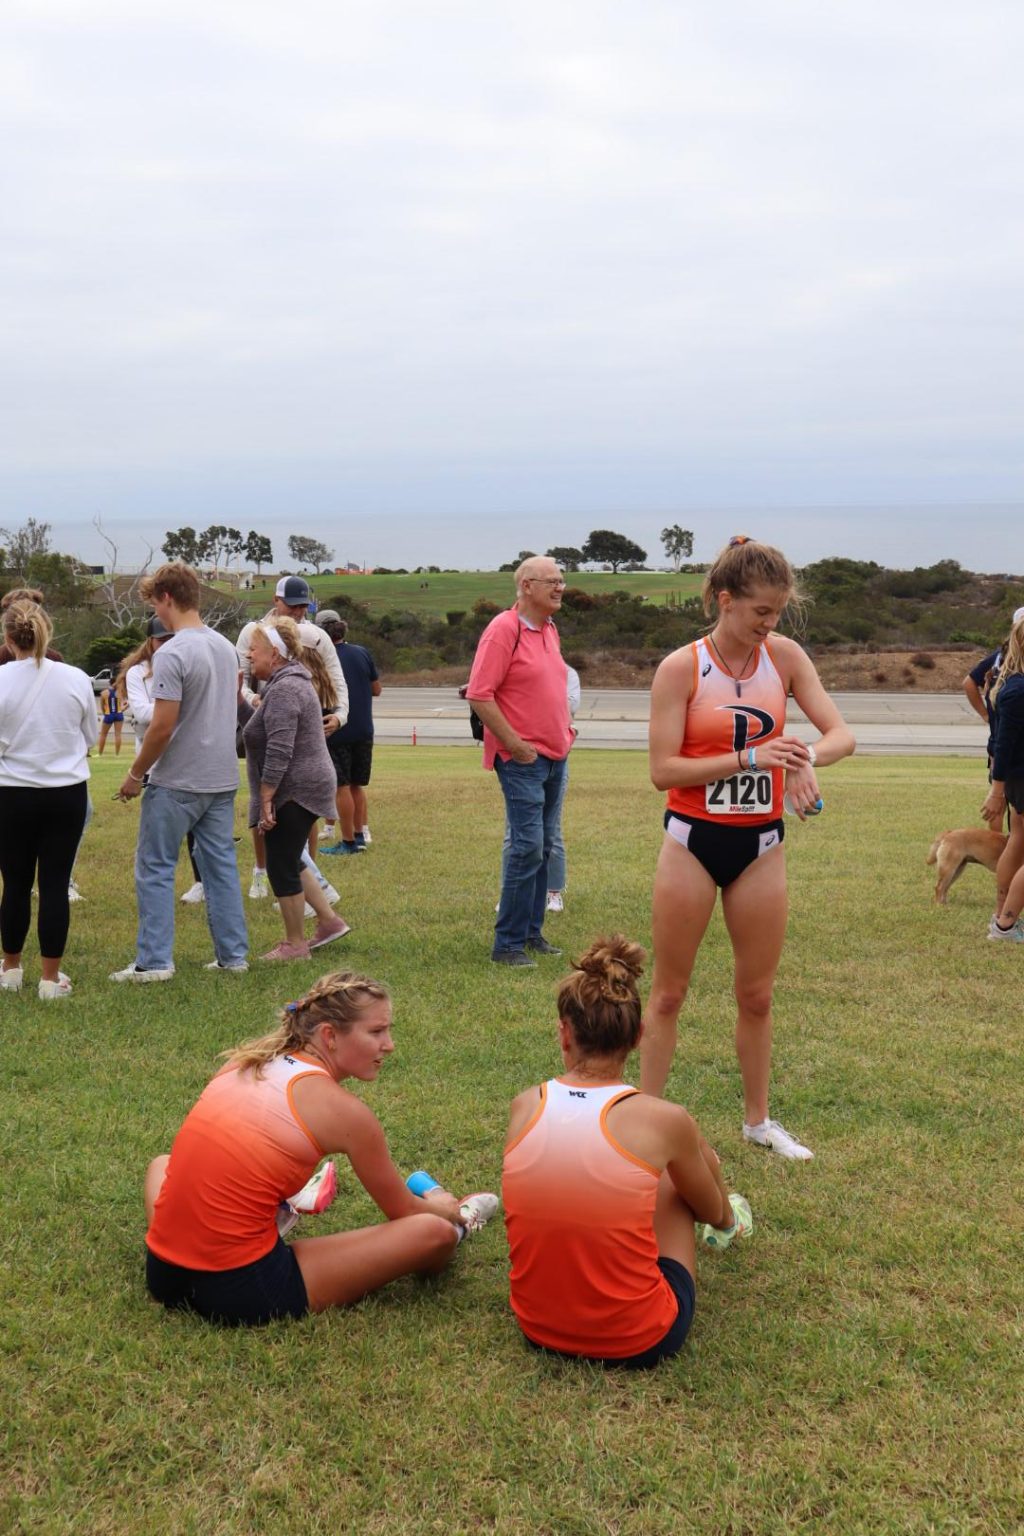 Members of the women's cross country team cool down at the Waves Invitational. LaCamera and Mittlesdorf both lead the way as sophomores.